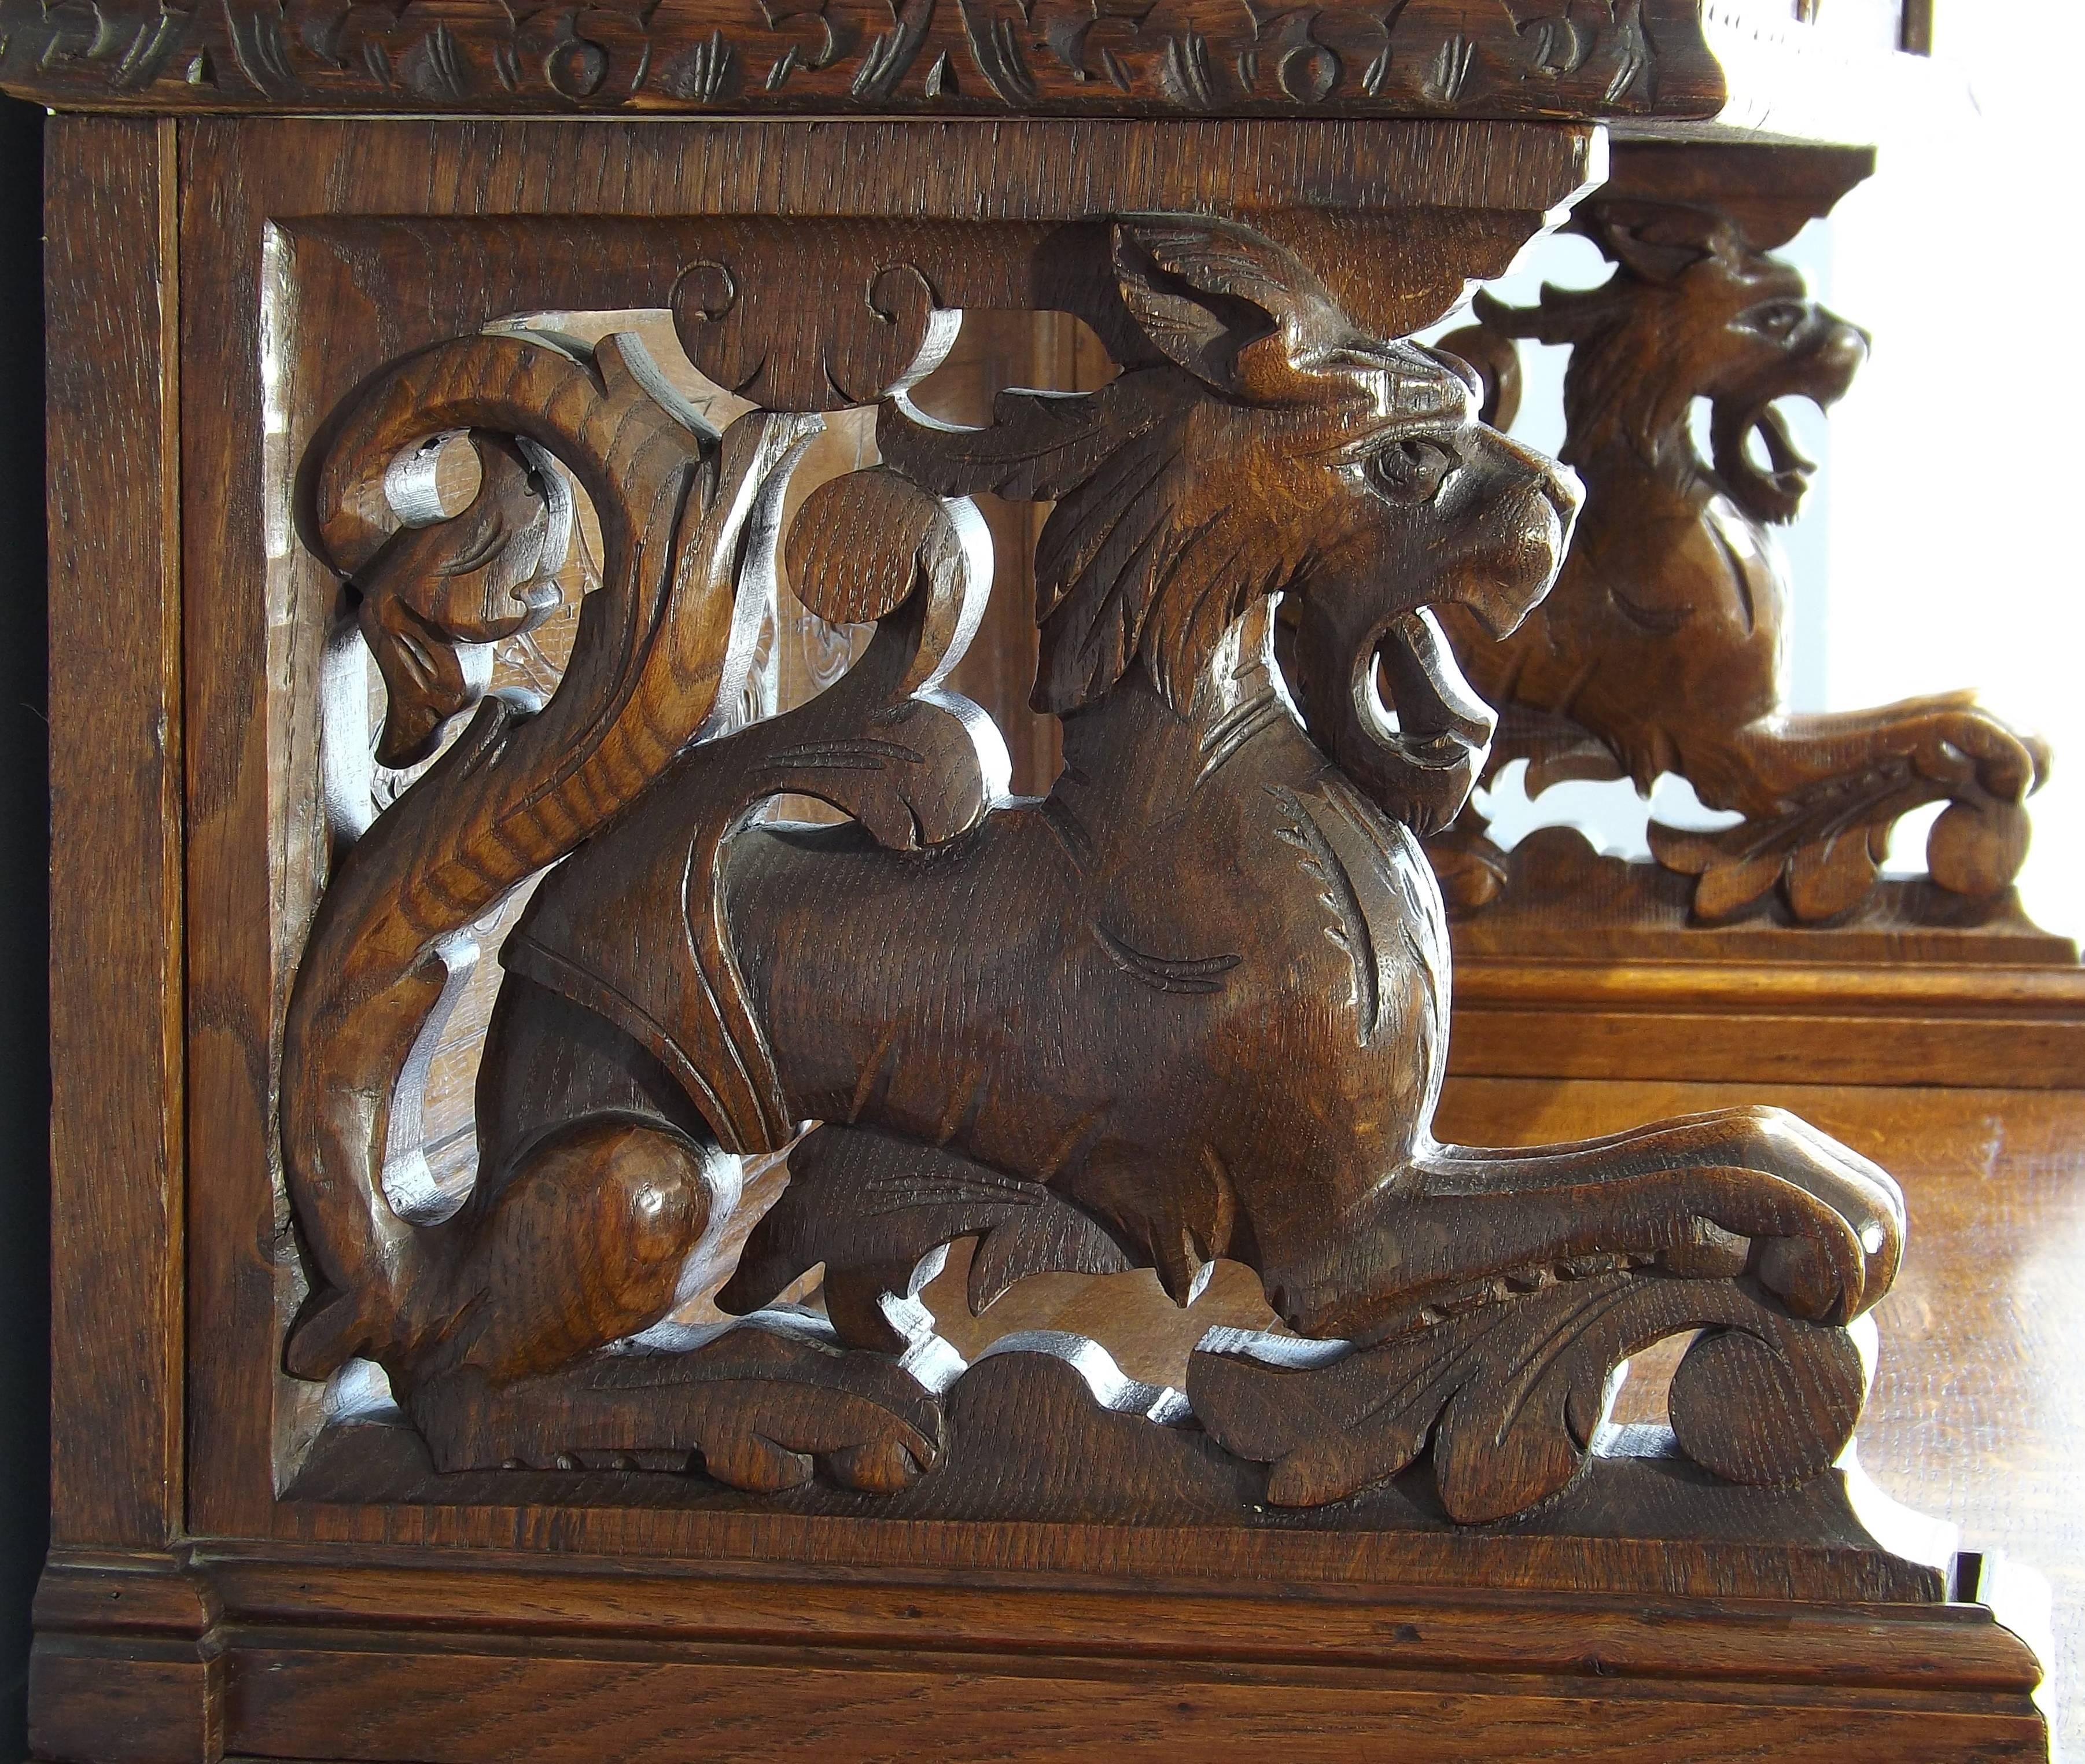 A very handsome German Black Forest cabinet, carved with wild game on the bottom doors. Two carved lions raise the top half of the cabinet to allow for a serving surface, glass doors allow for the display of fine china or other collectibles.